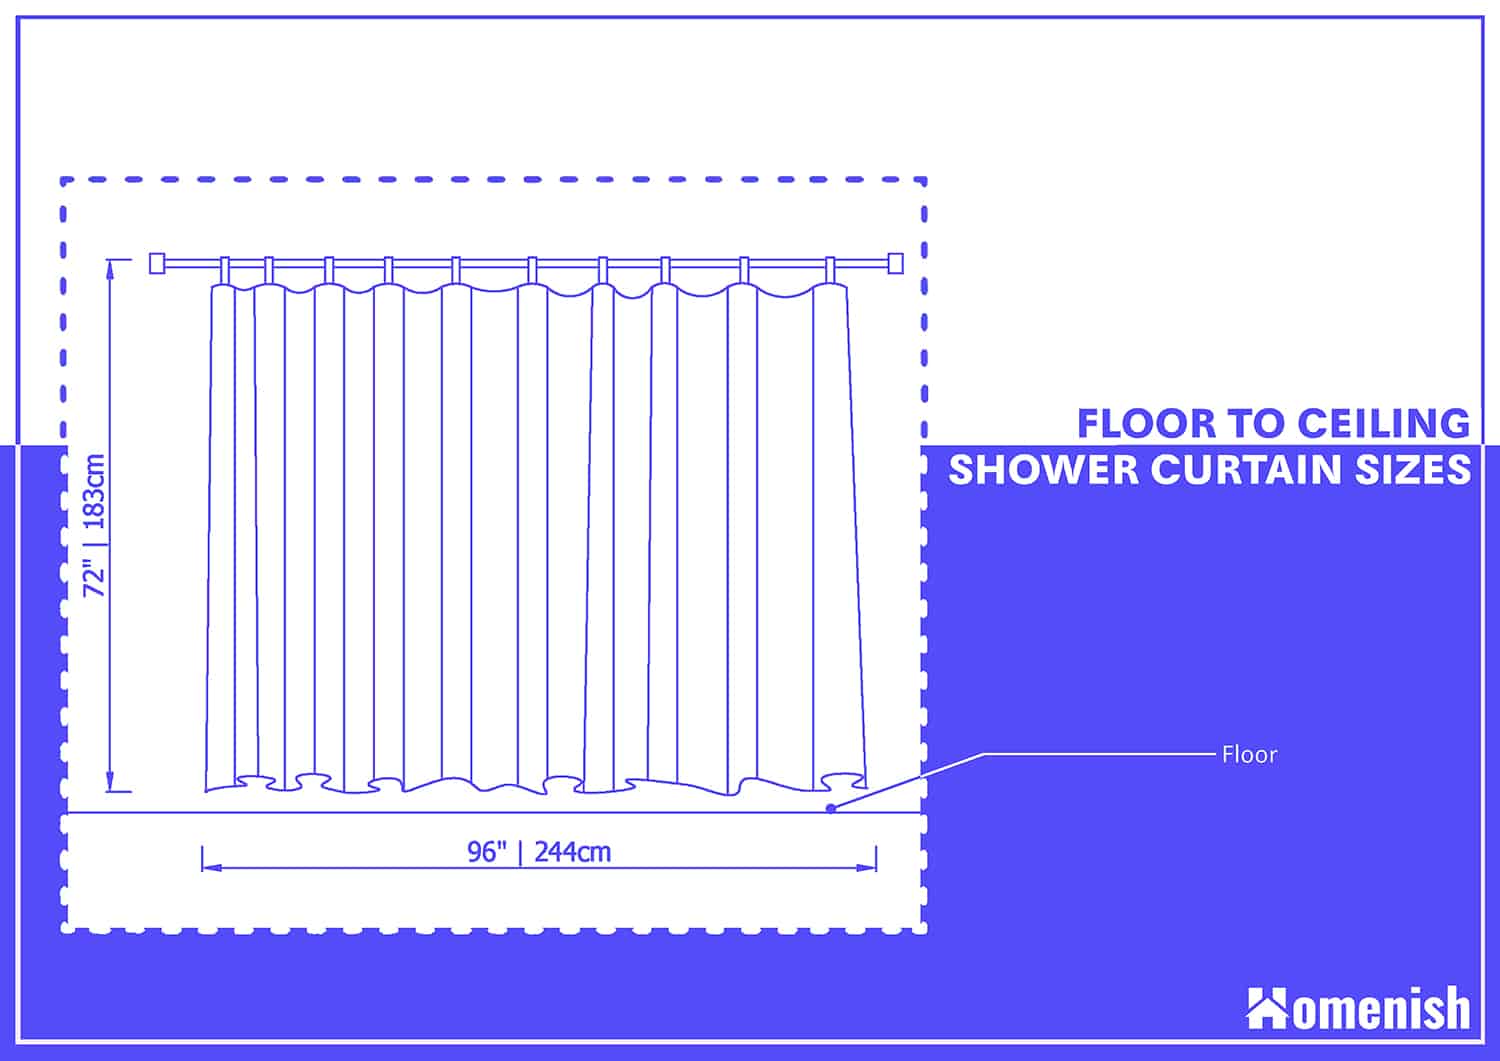 Standard Shower Curtain Size, How To Extend Shower Curtain Length